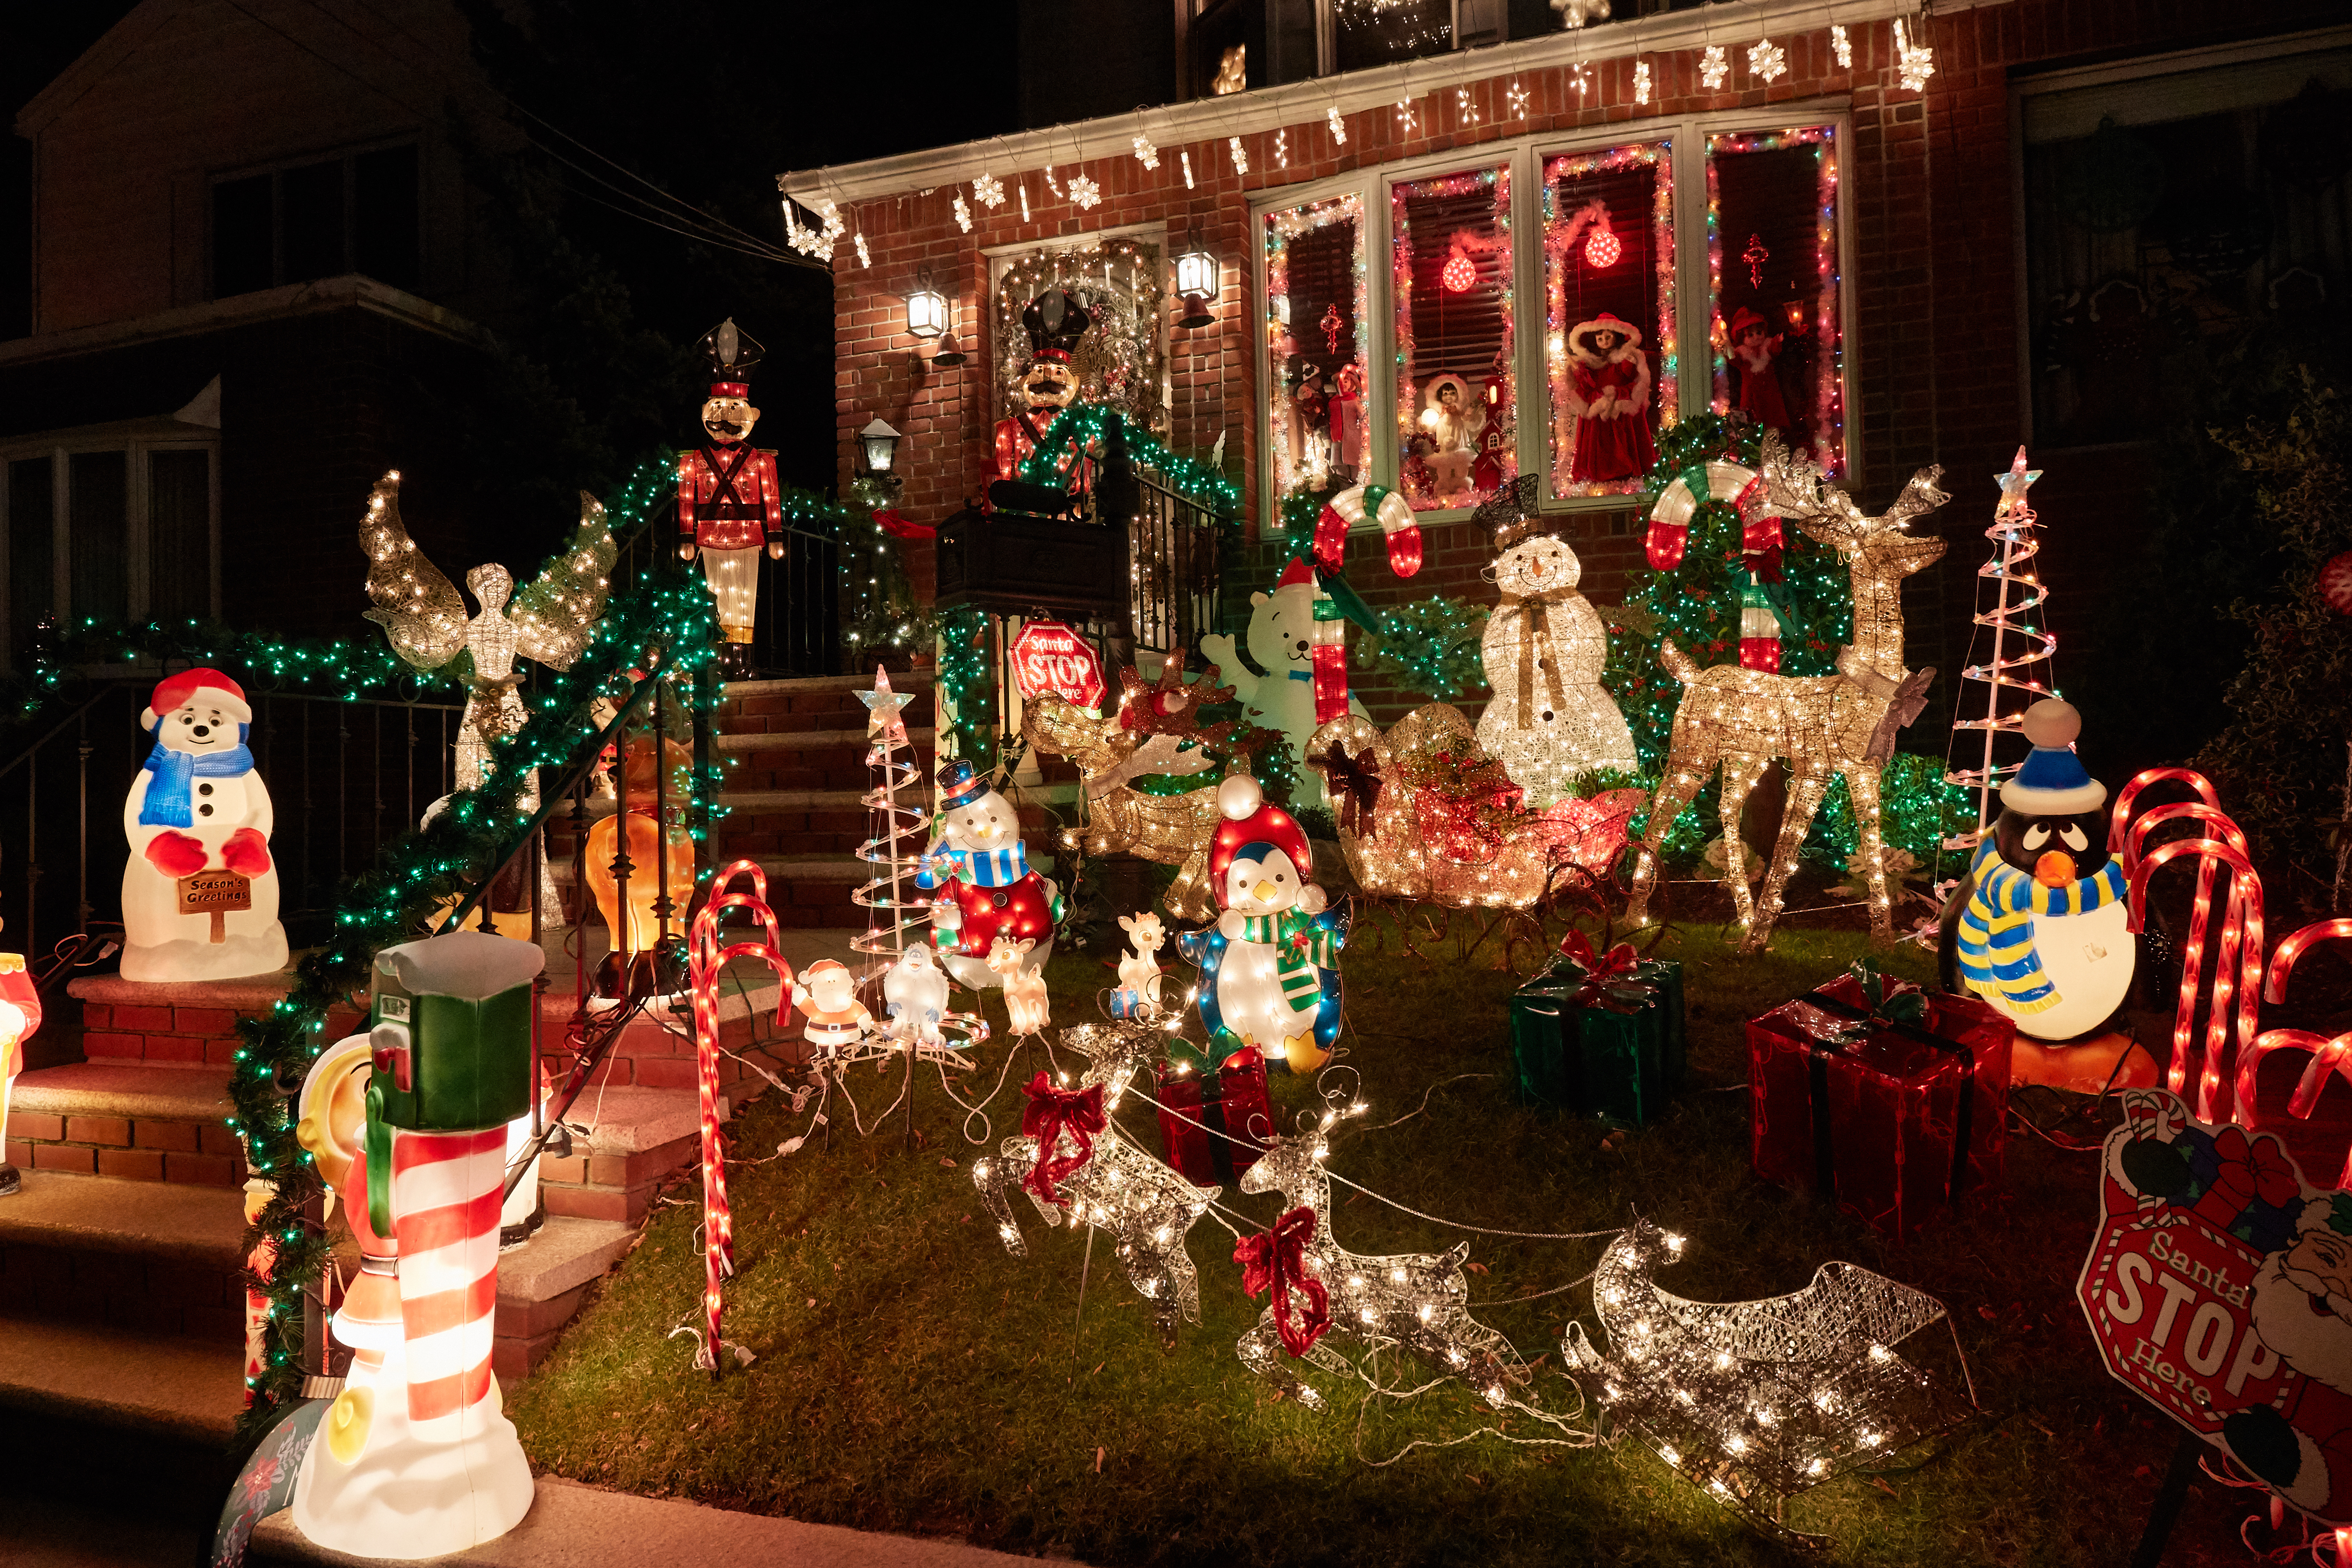 How To Create HOA Rules for Holiday Decorations